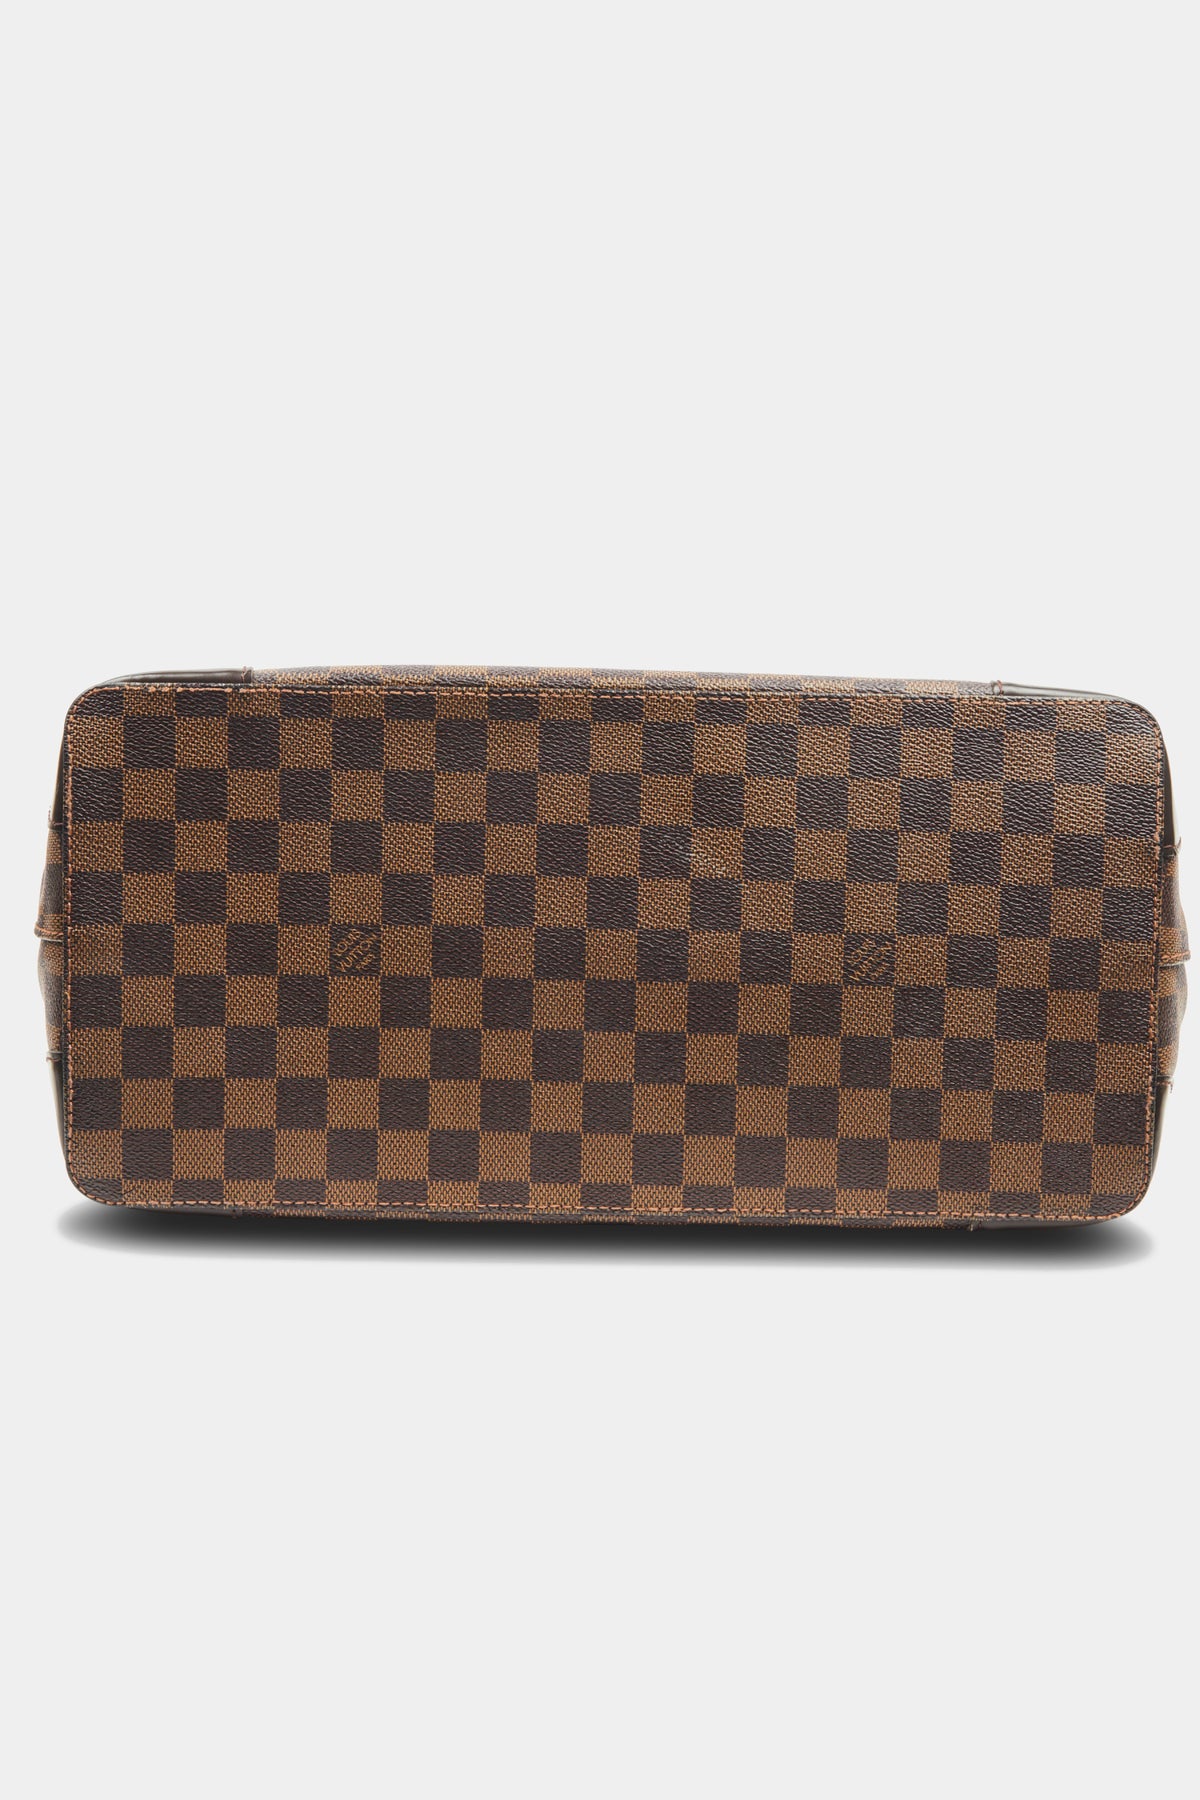 Louis Vuitton Hampstead PM Tote Bag in Brown | Lord & Taylor